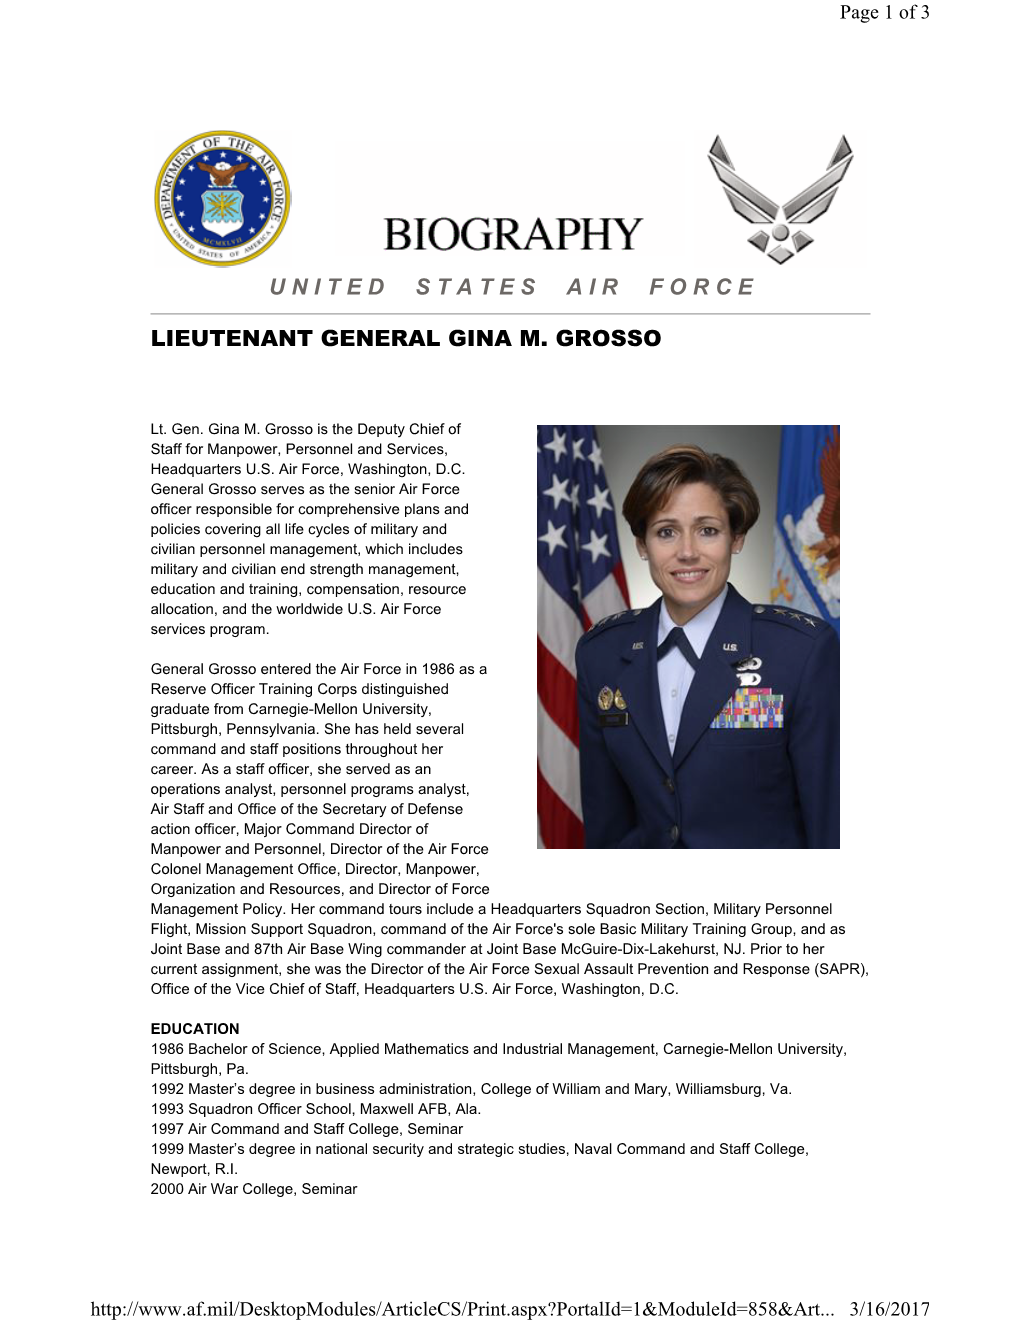 Lieutenant General Gina M. Grosso United States Air Force